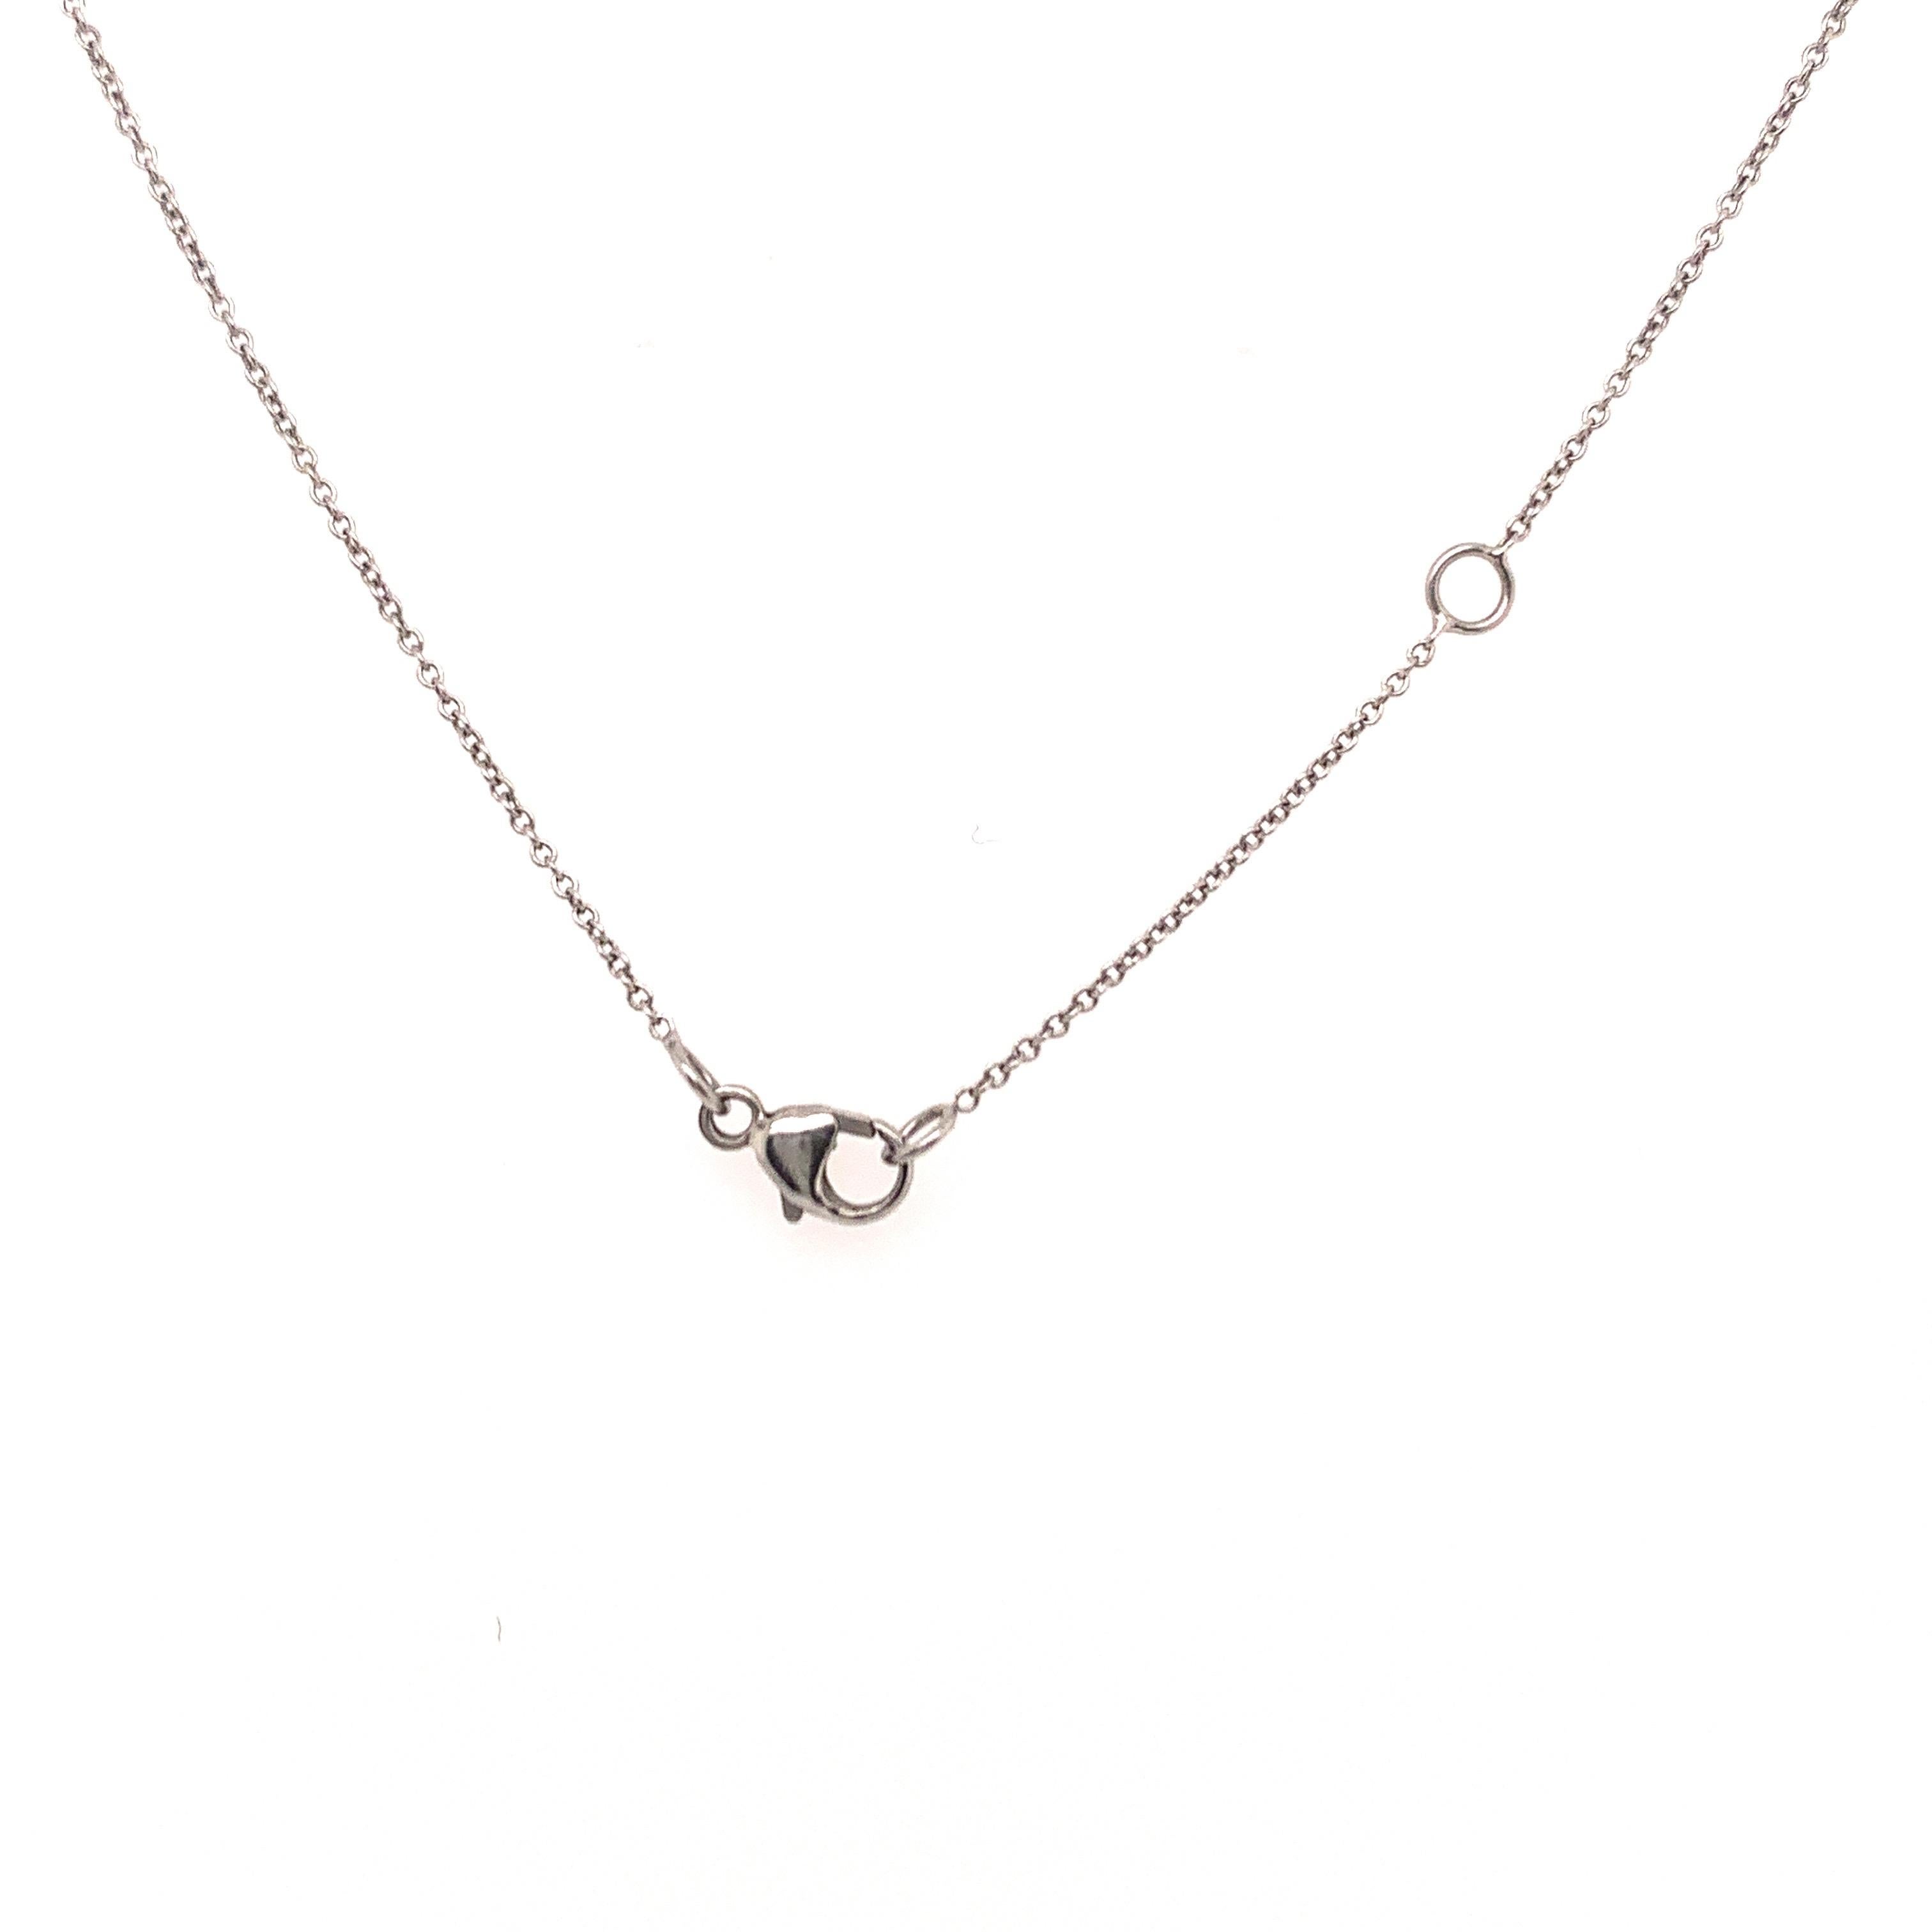 Charming 1.01 carat round brilliant Cut Diamond solitaire pendant necklace from ISSAC NUSSBAUM NEW YORK. 
Set in a hand made “floating” platinum setting this incredible workmanship with minimal metal showing, brings out the remarkable brilliance of